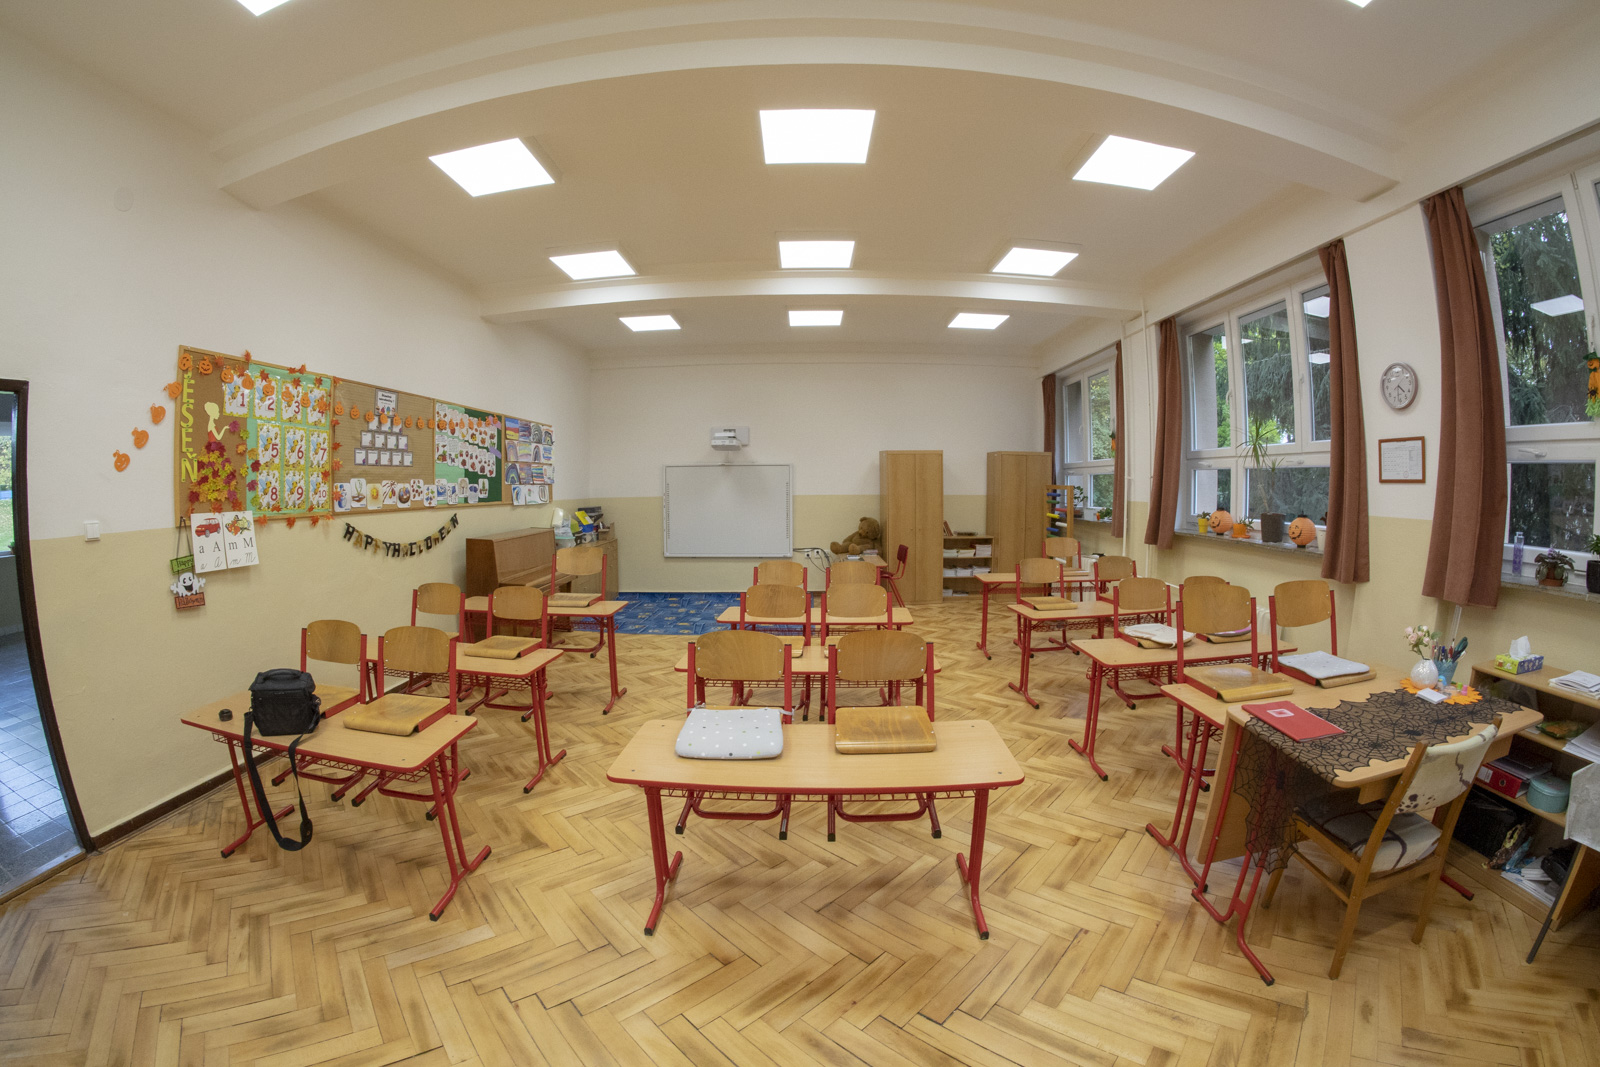 LED lighting modernization in classrooms and cabinets